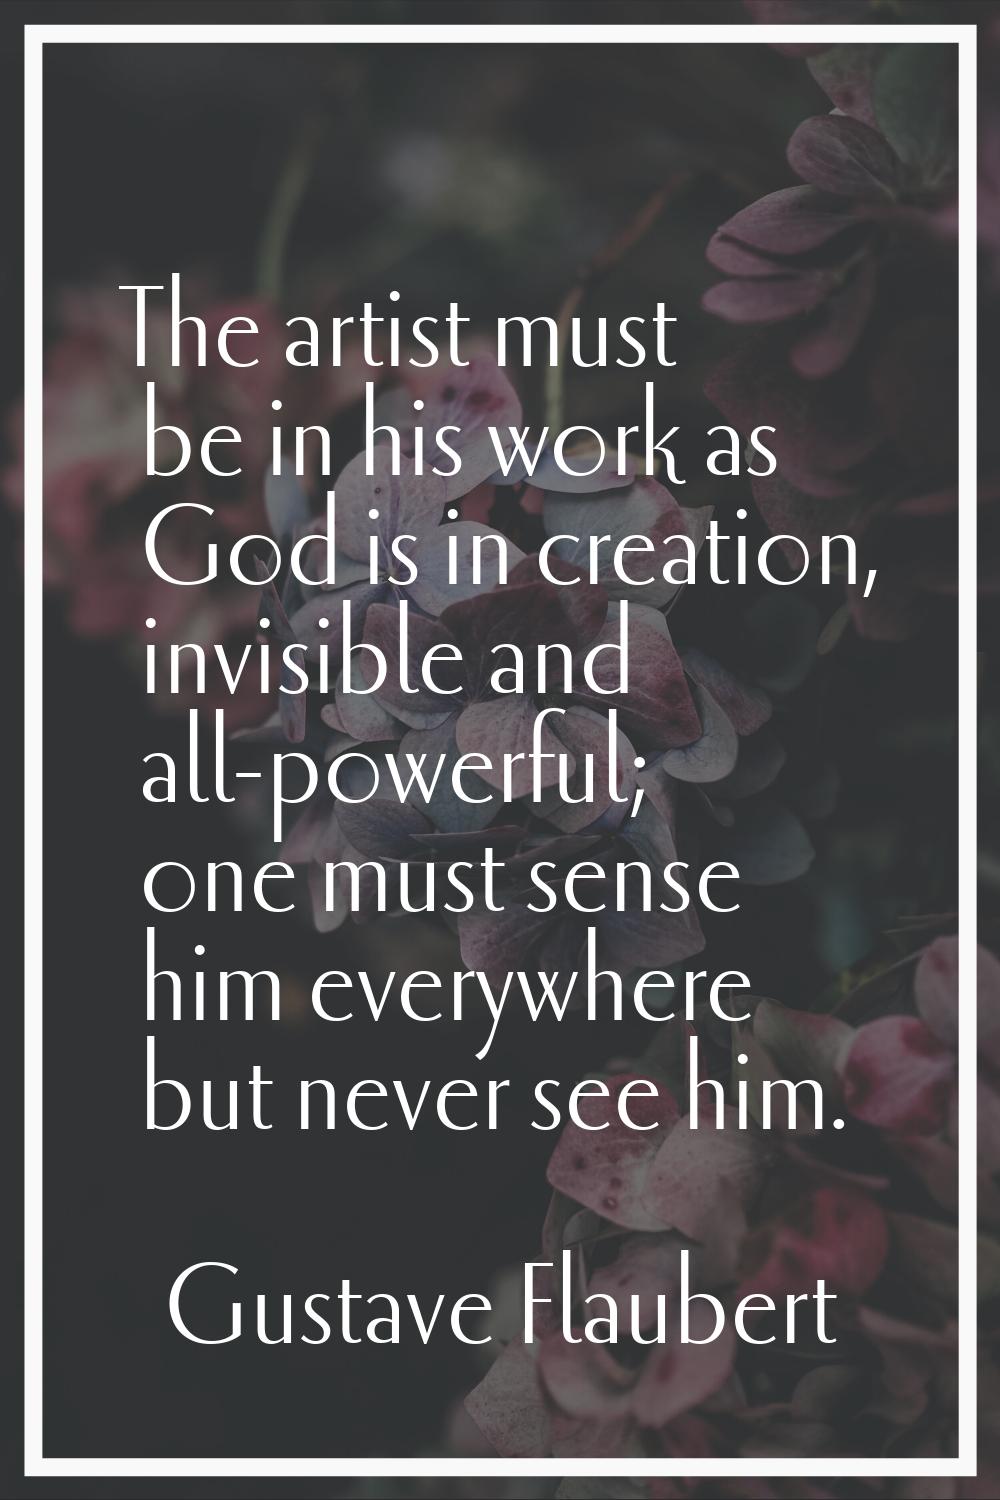 The artist must be in his work as God is in creation, invisible and all-powerful; one must sense hi